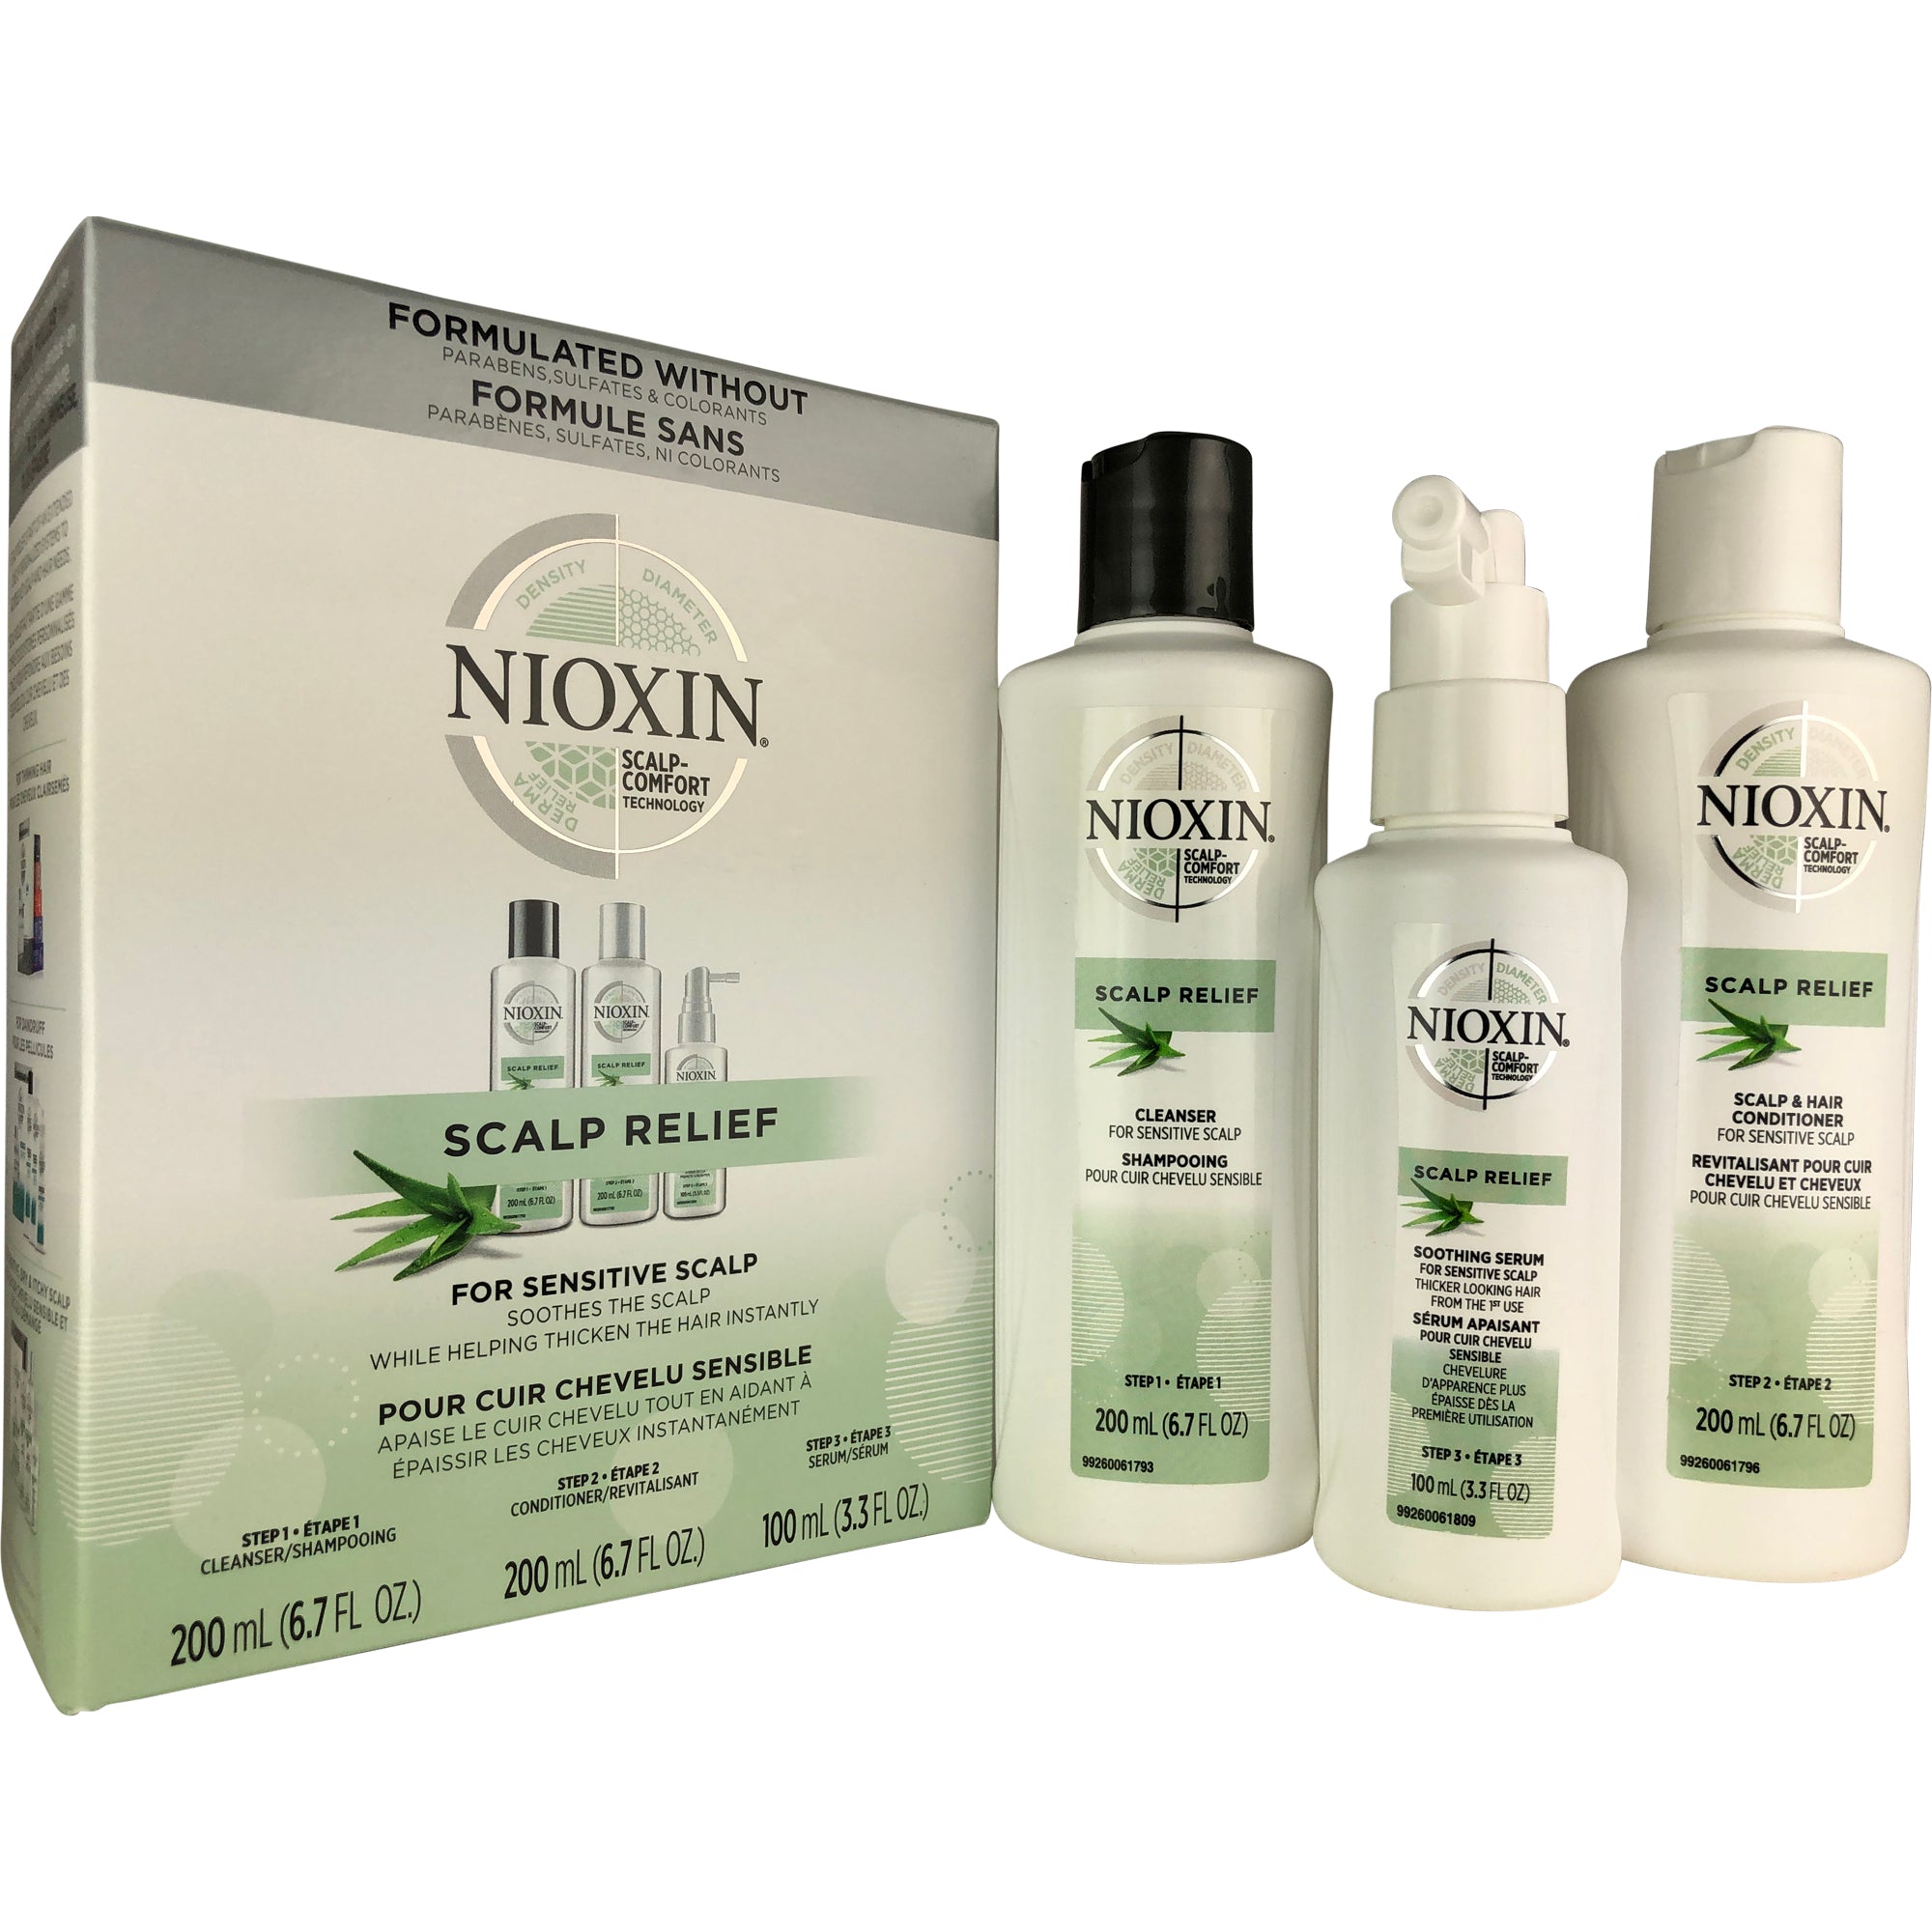 Nioxin Scalp Relief System 3 Pc. Kit (Cleanser, Scalp & Hair Conditioner, Soothing Serum)